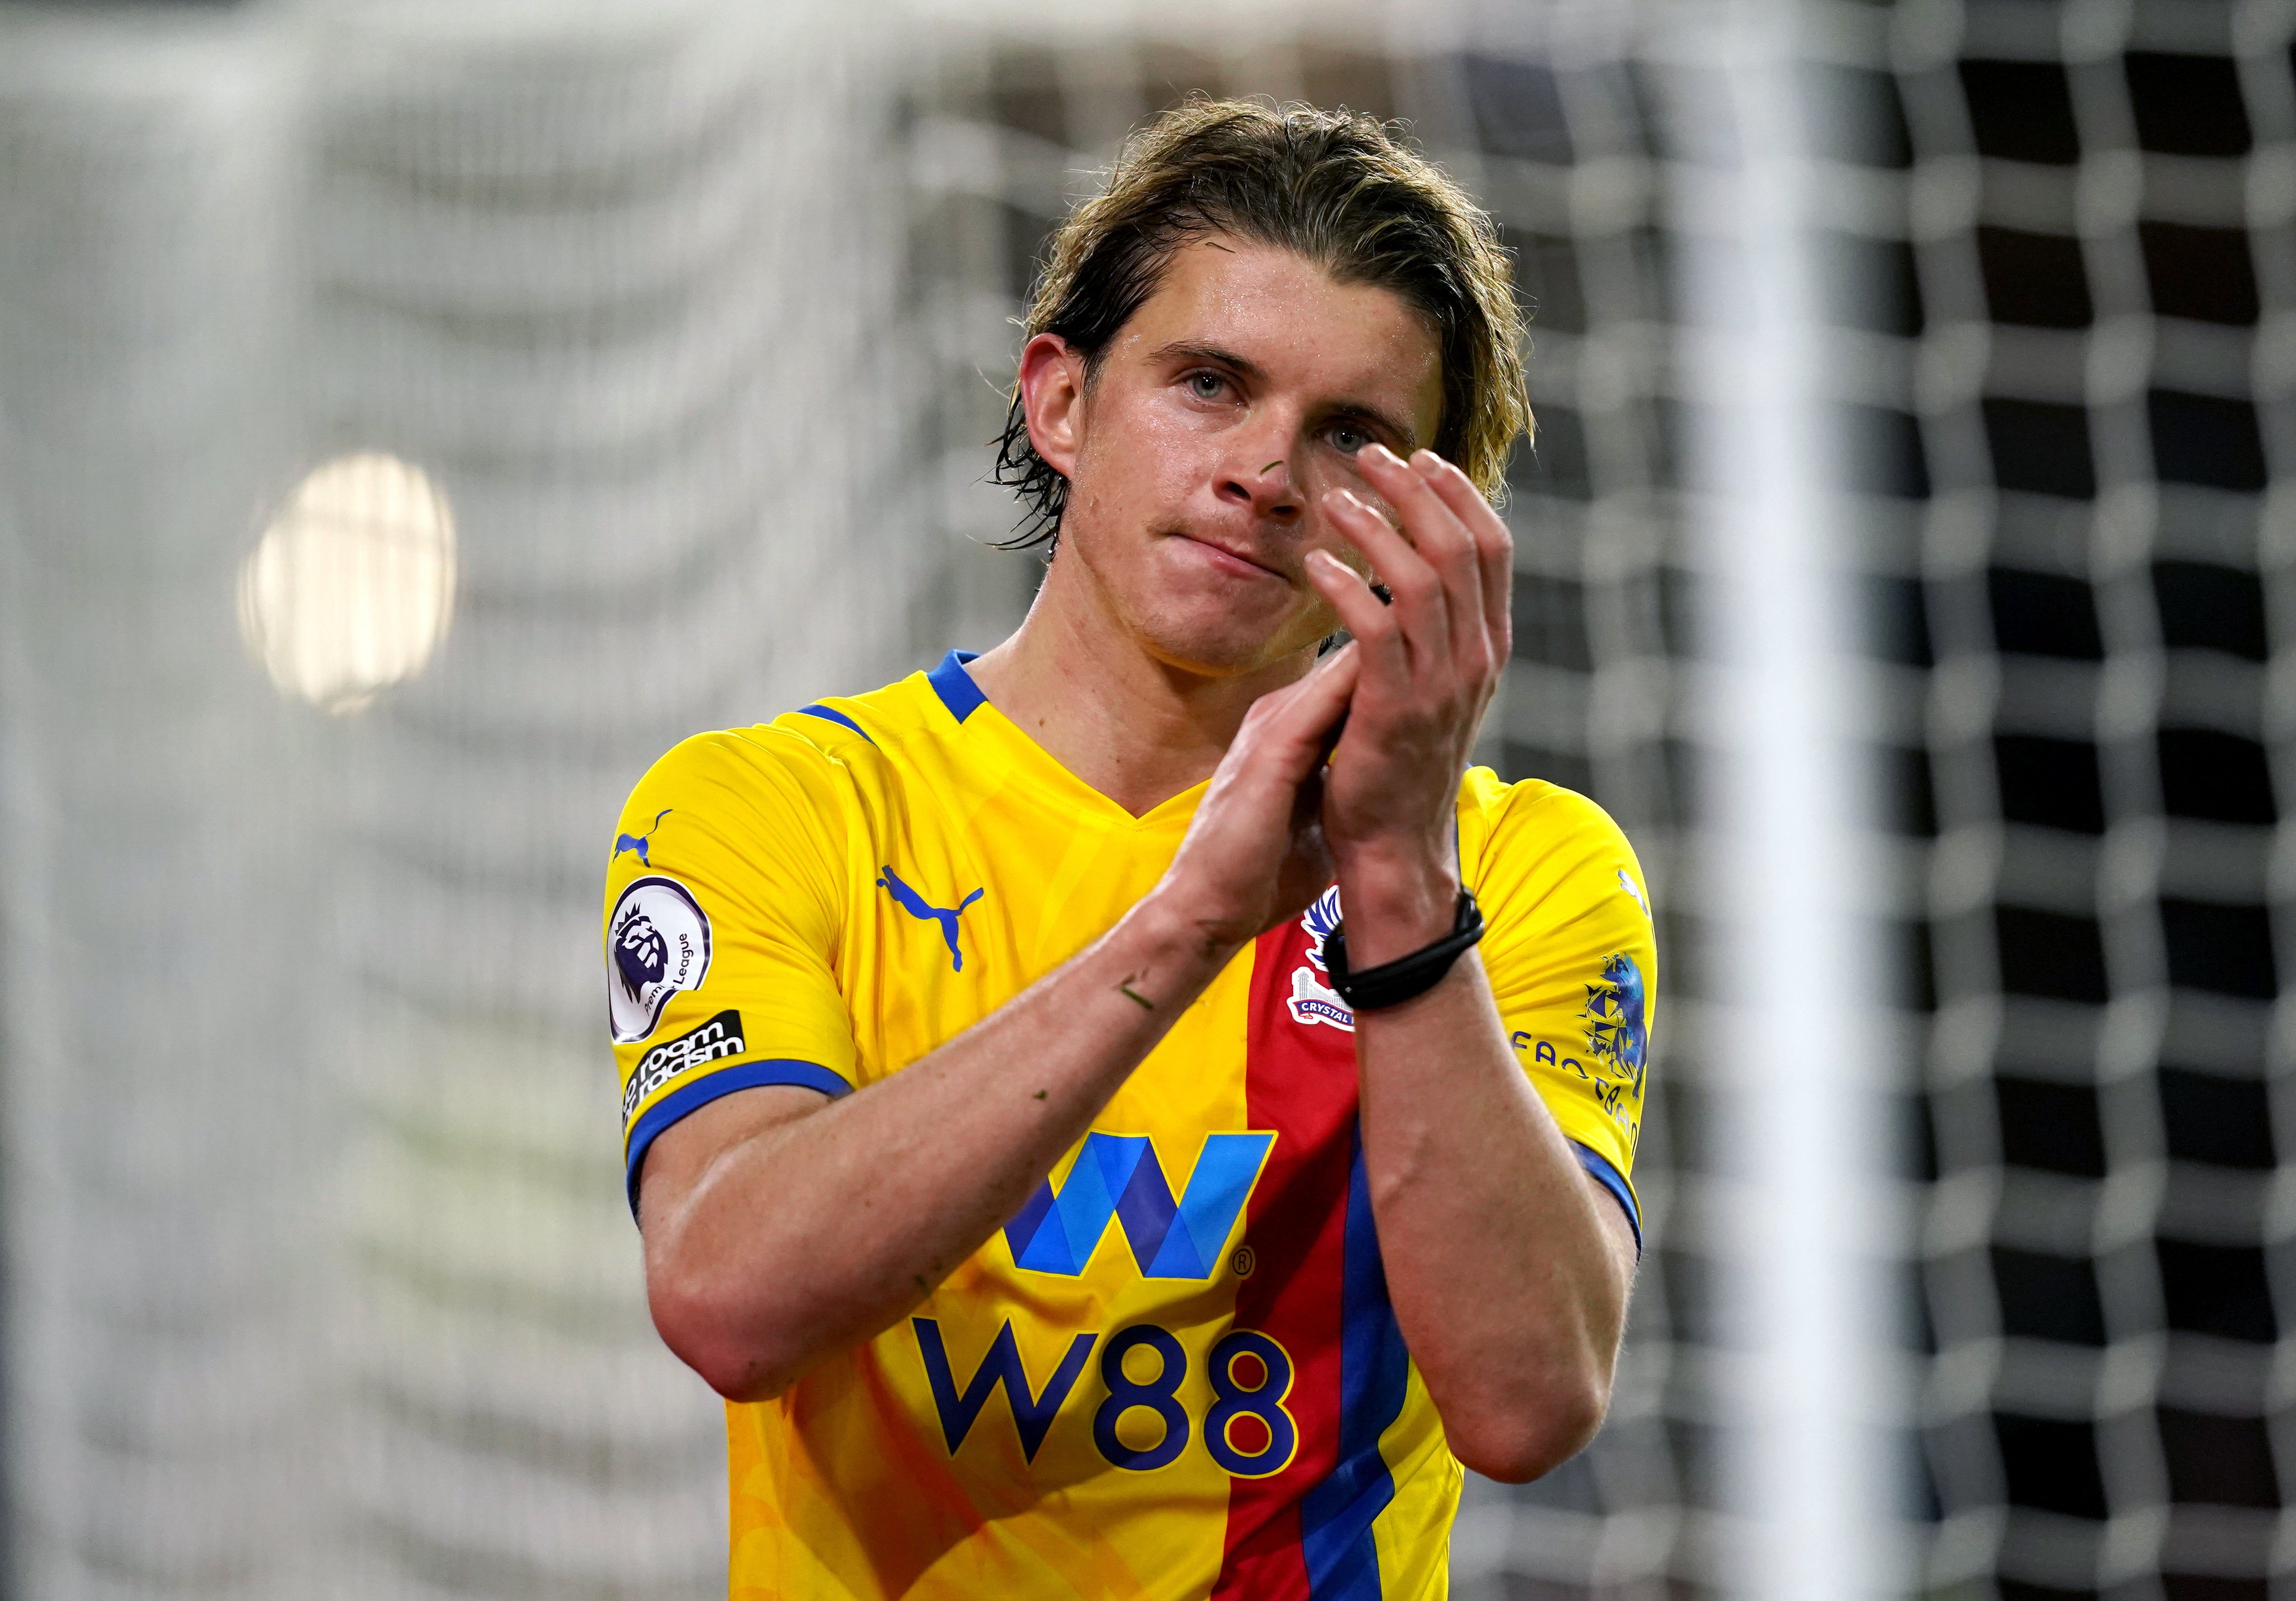 Crystal Palace’s Conor Gallagher has impressed on loan from Chelsea. (Martin Rickett/PA)